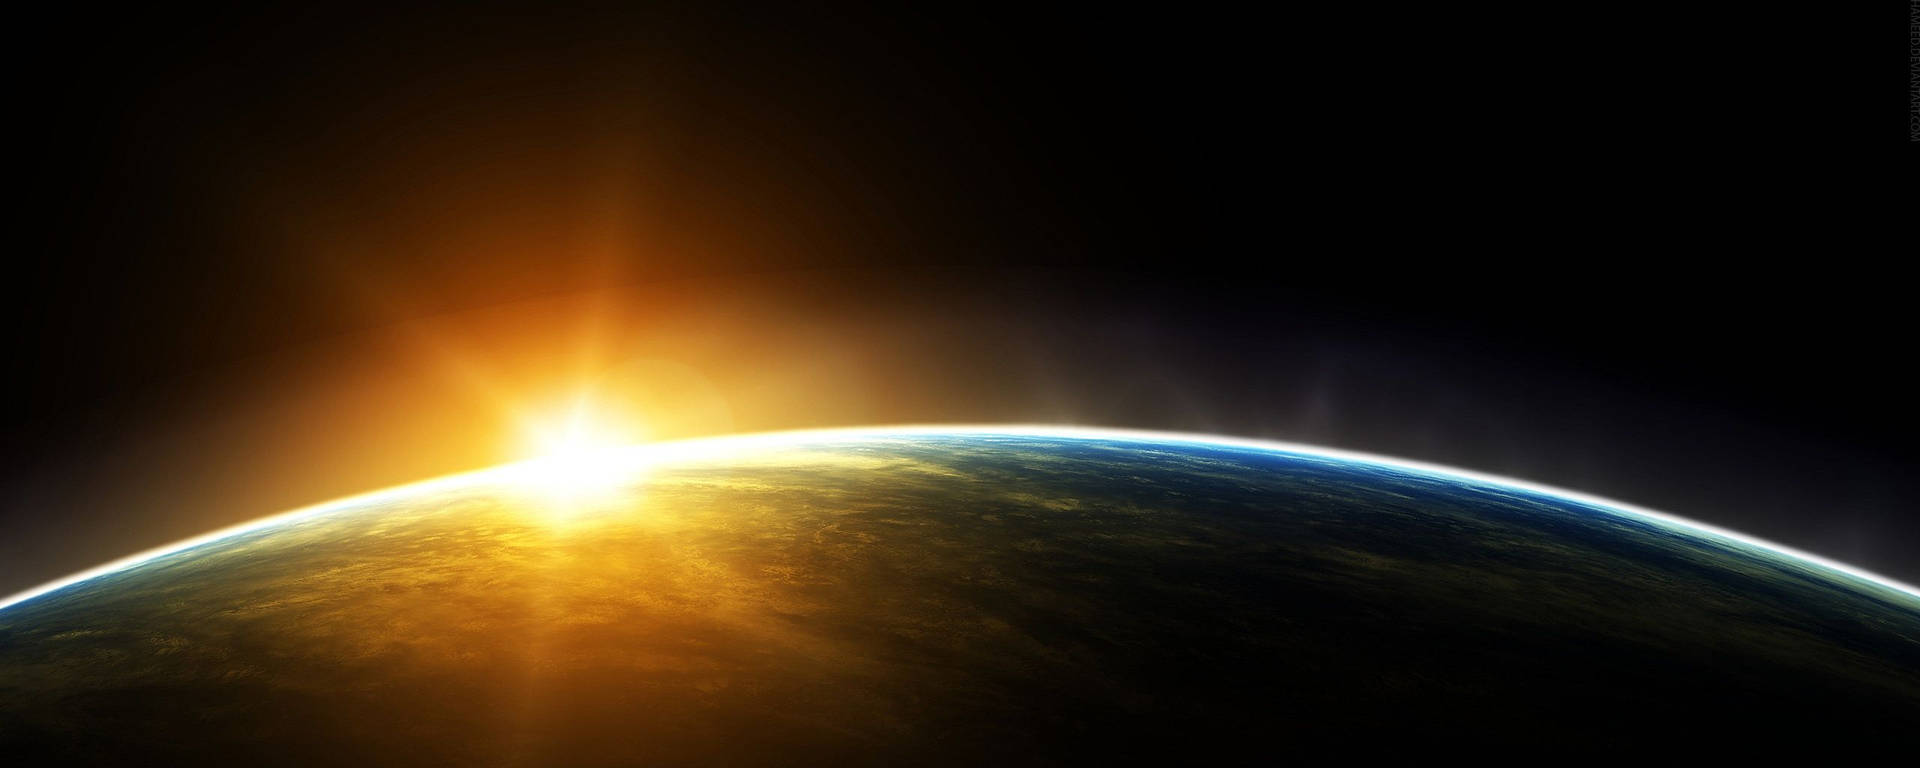 Widescreen Sunrise From Space Background